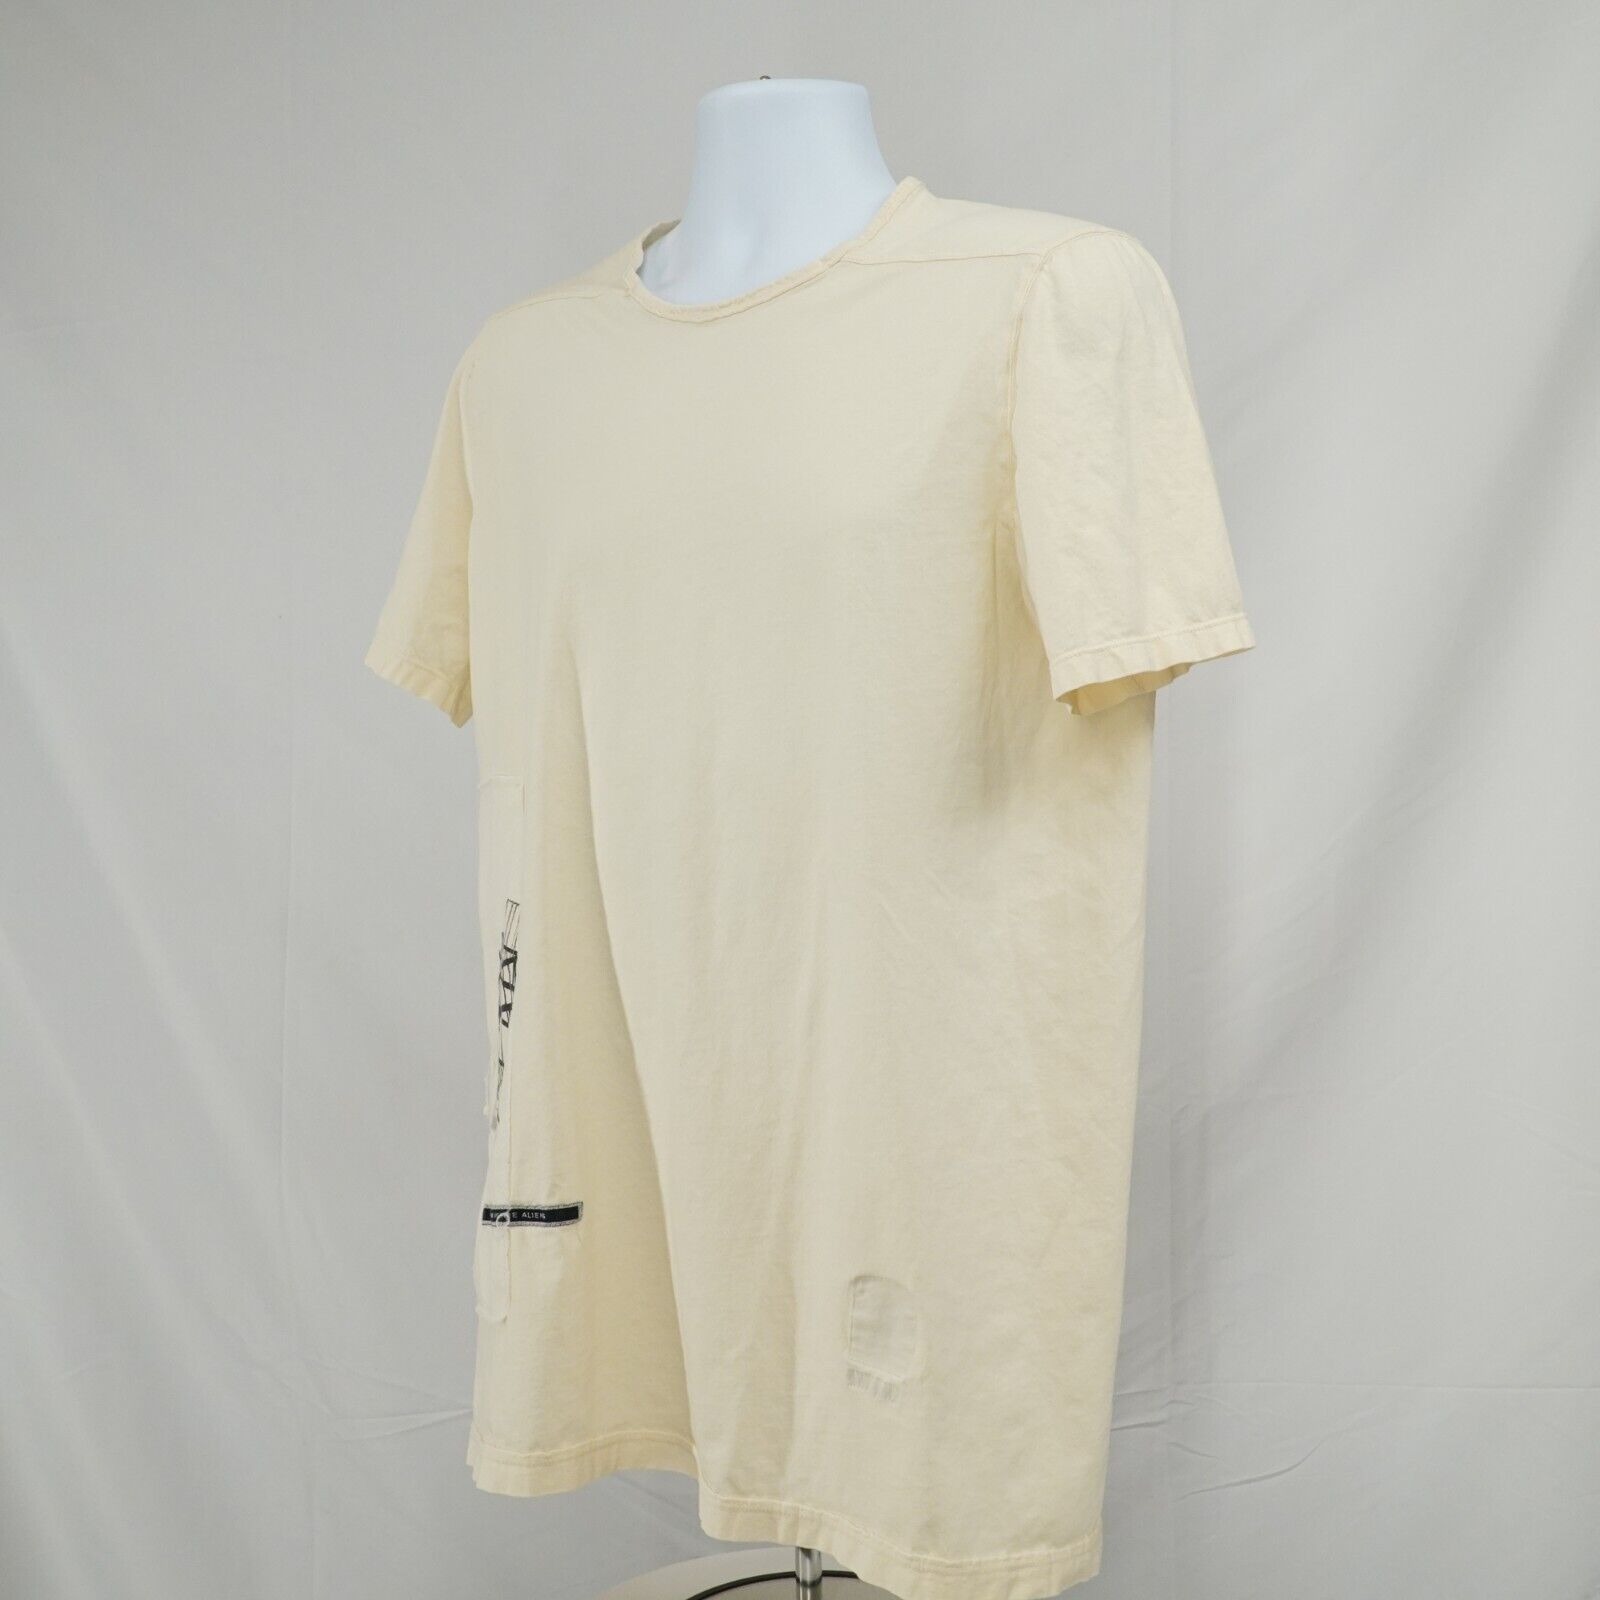 DRKSDHW Patched Level Tee Milk White Cotton - Lar - 9